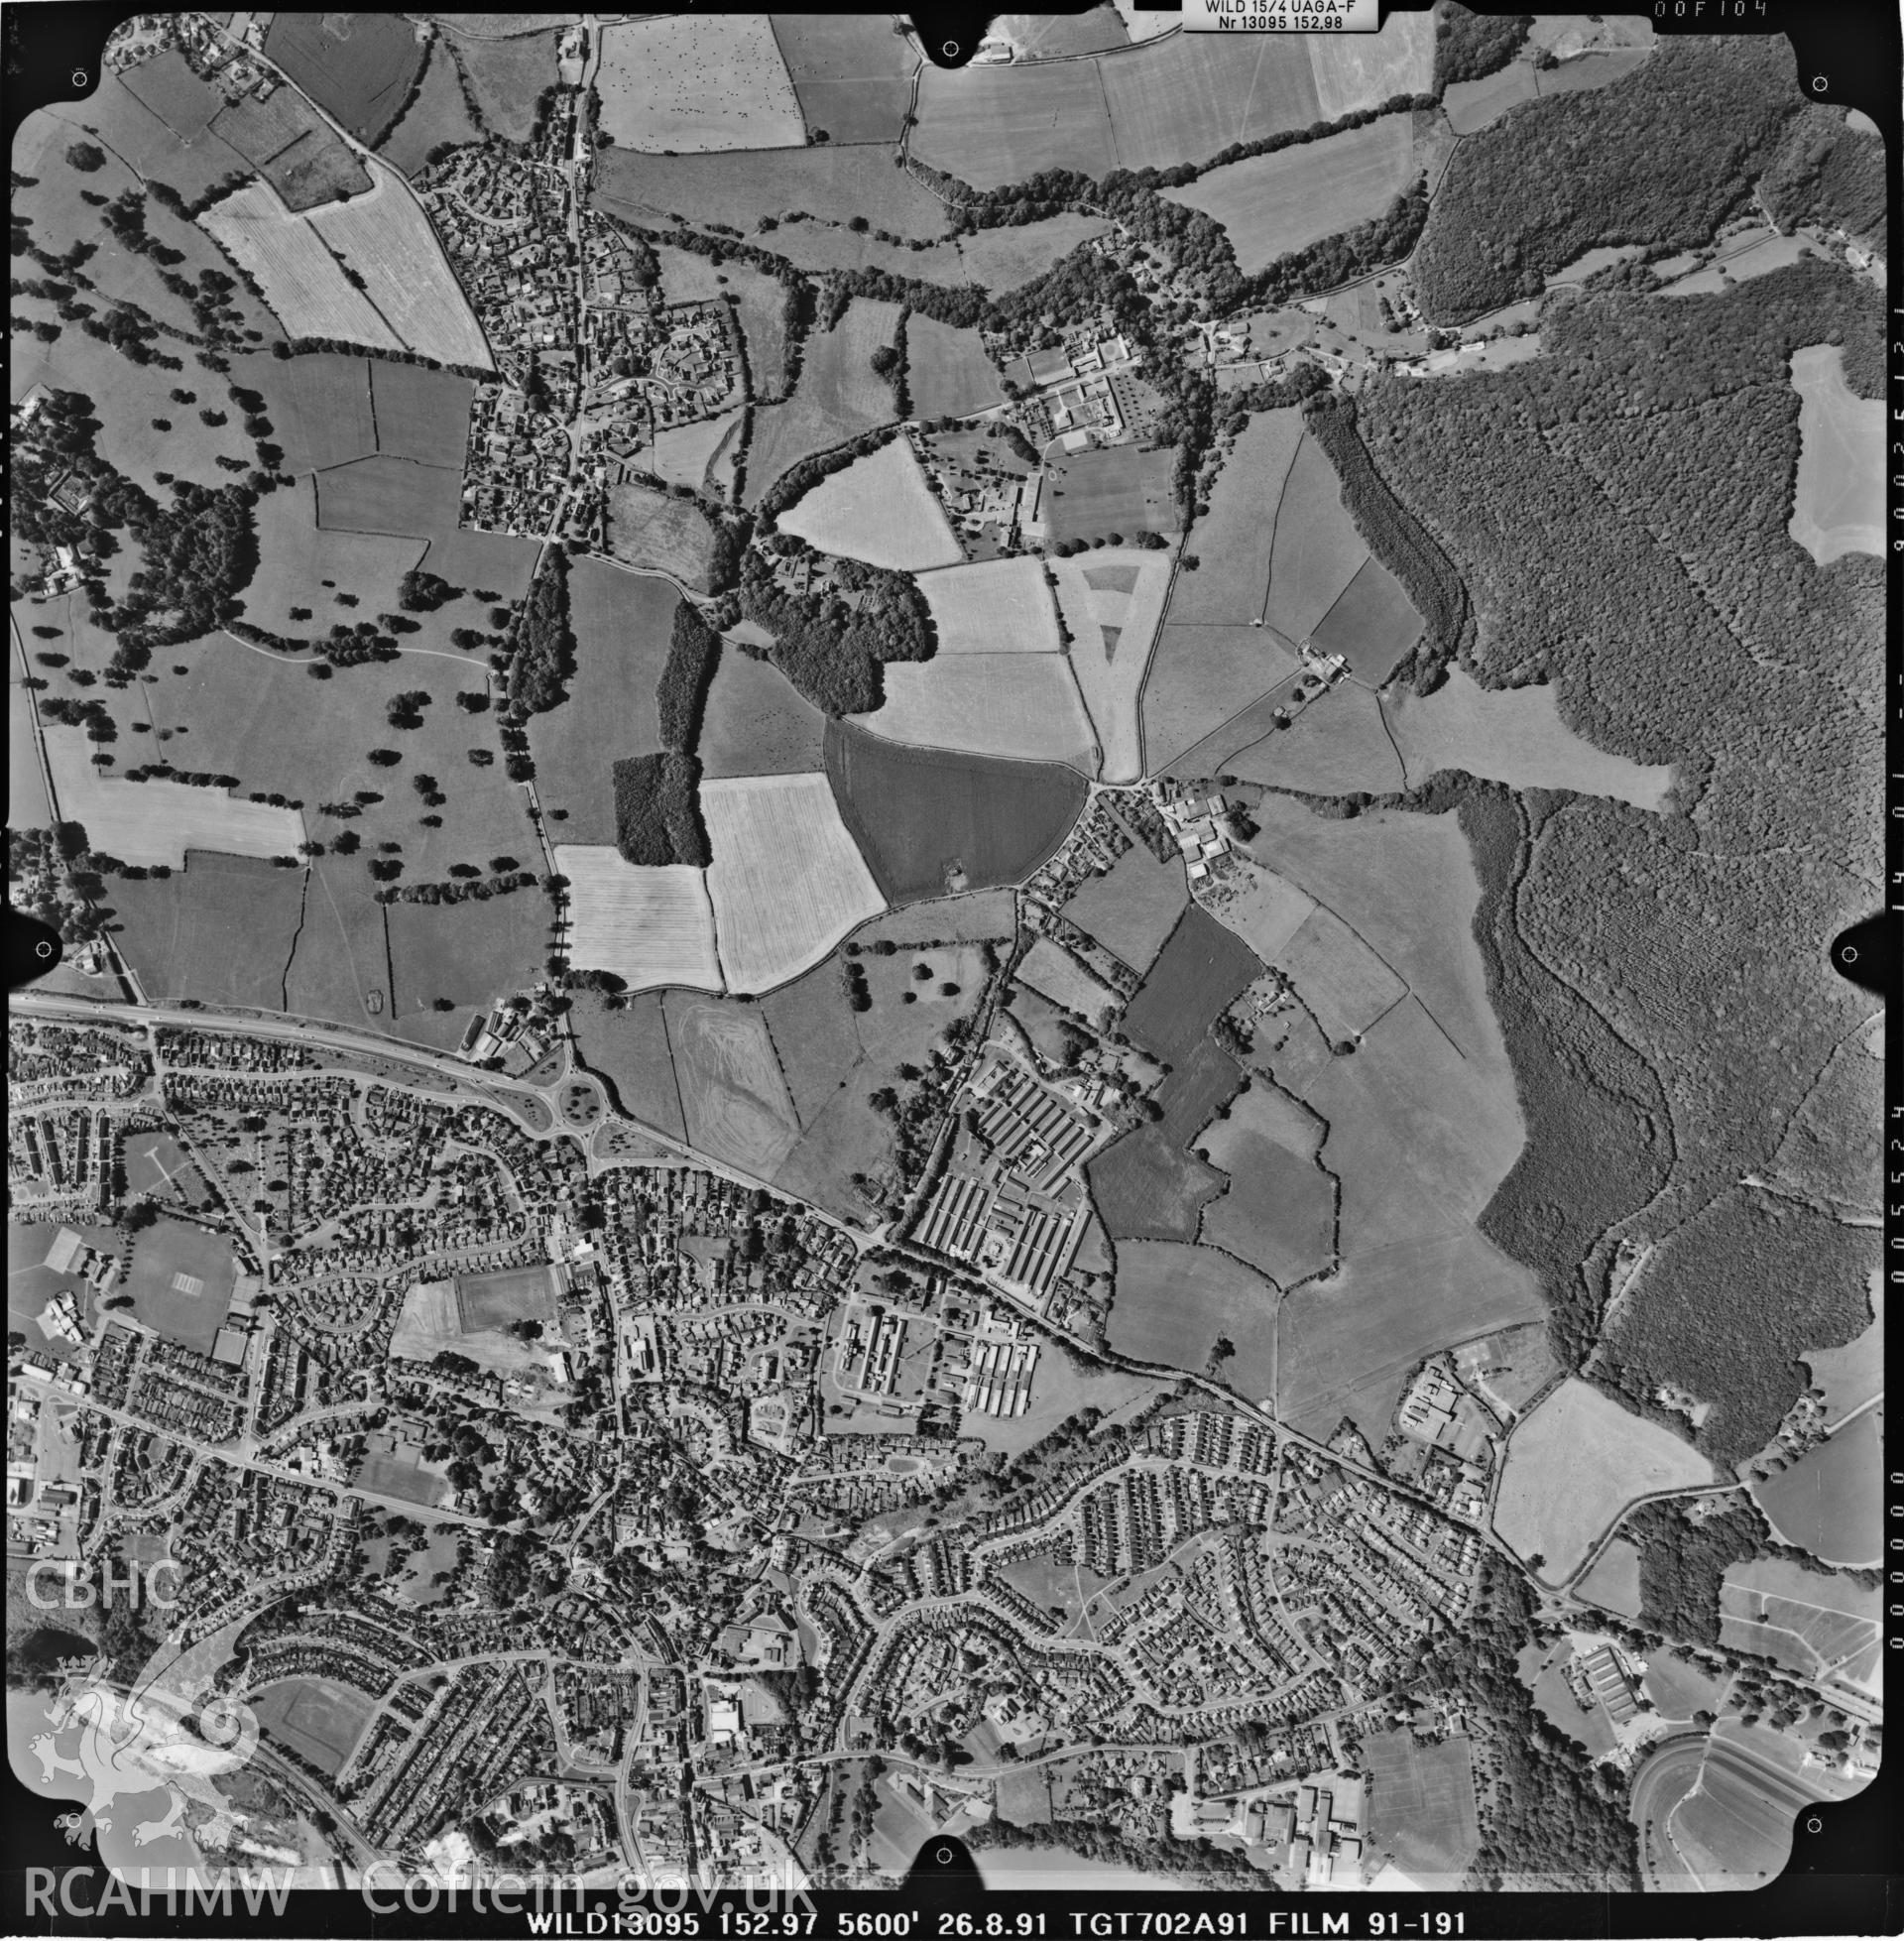 Digitized copy of an aerial photograph showing the St Lawrence area of Chepstow, taken by Ordnance Survey, 1991.